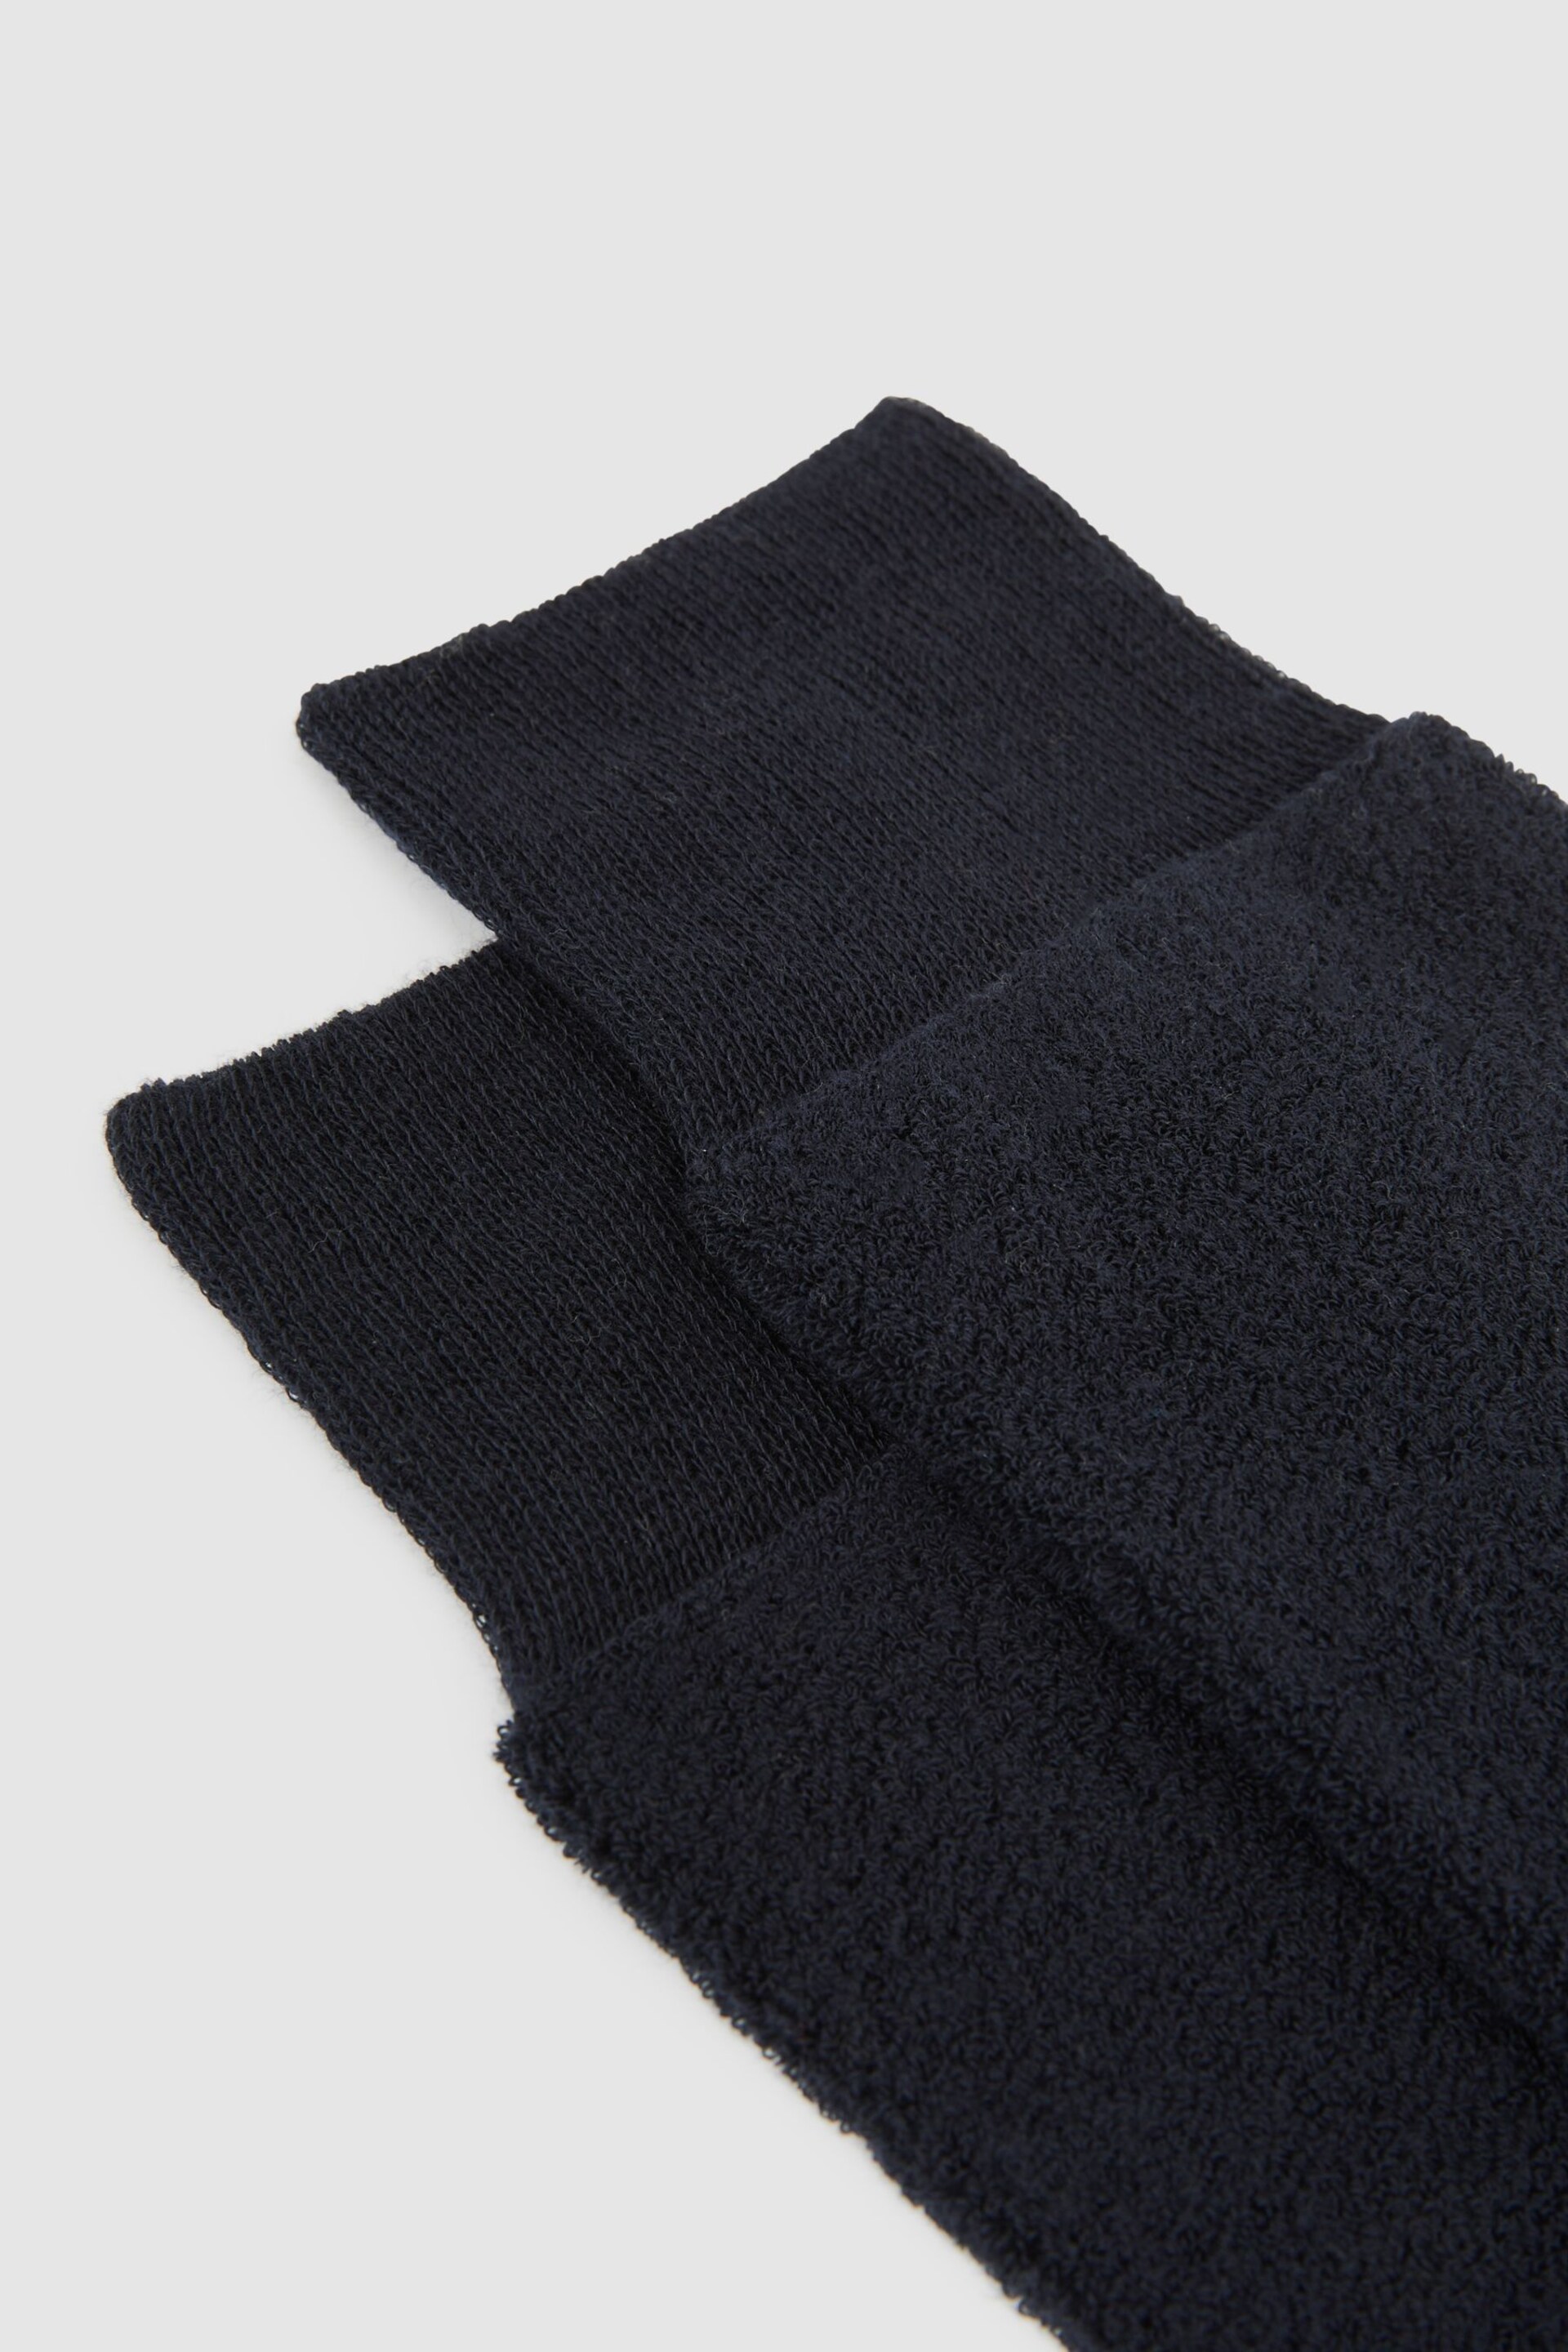 Reiss Navy Alers Cotton Blend Terry Towelling Socks - Image 2 of 3